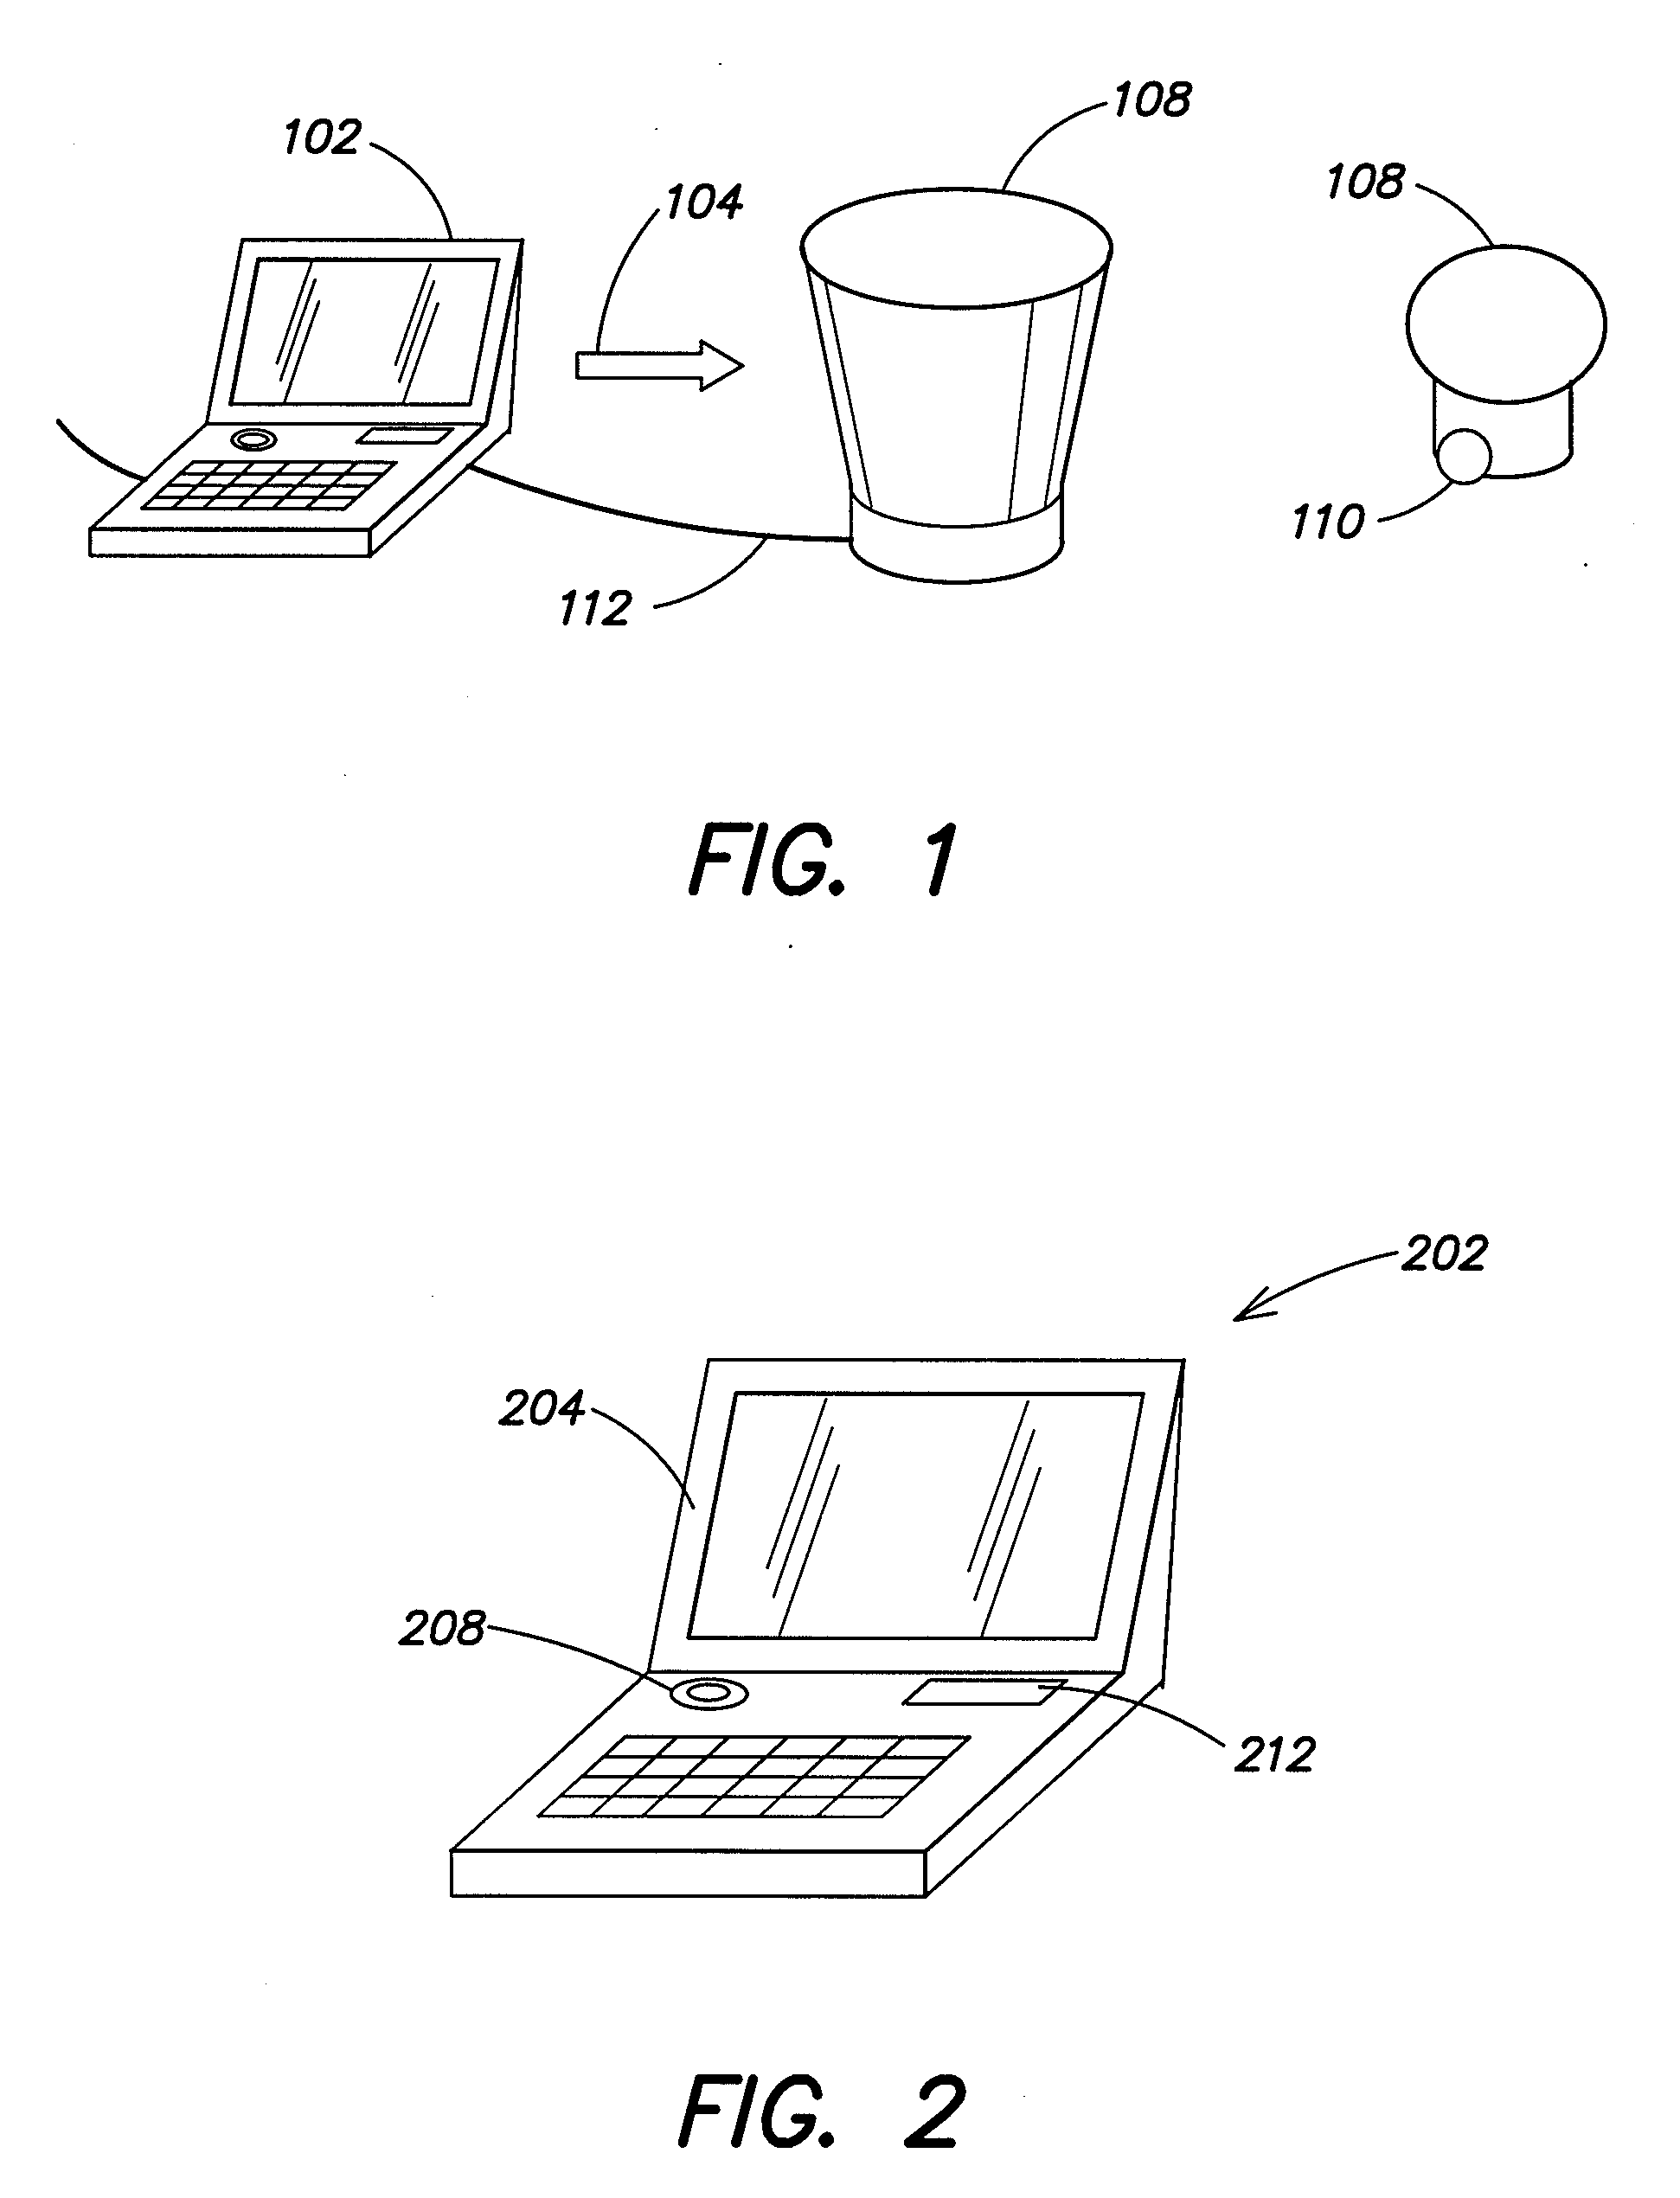 Methods and apparatus for conveying information via color of light